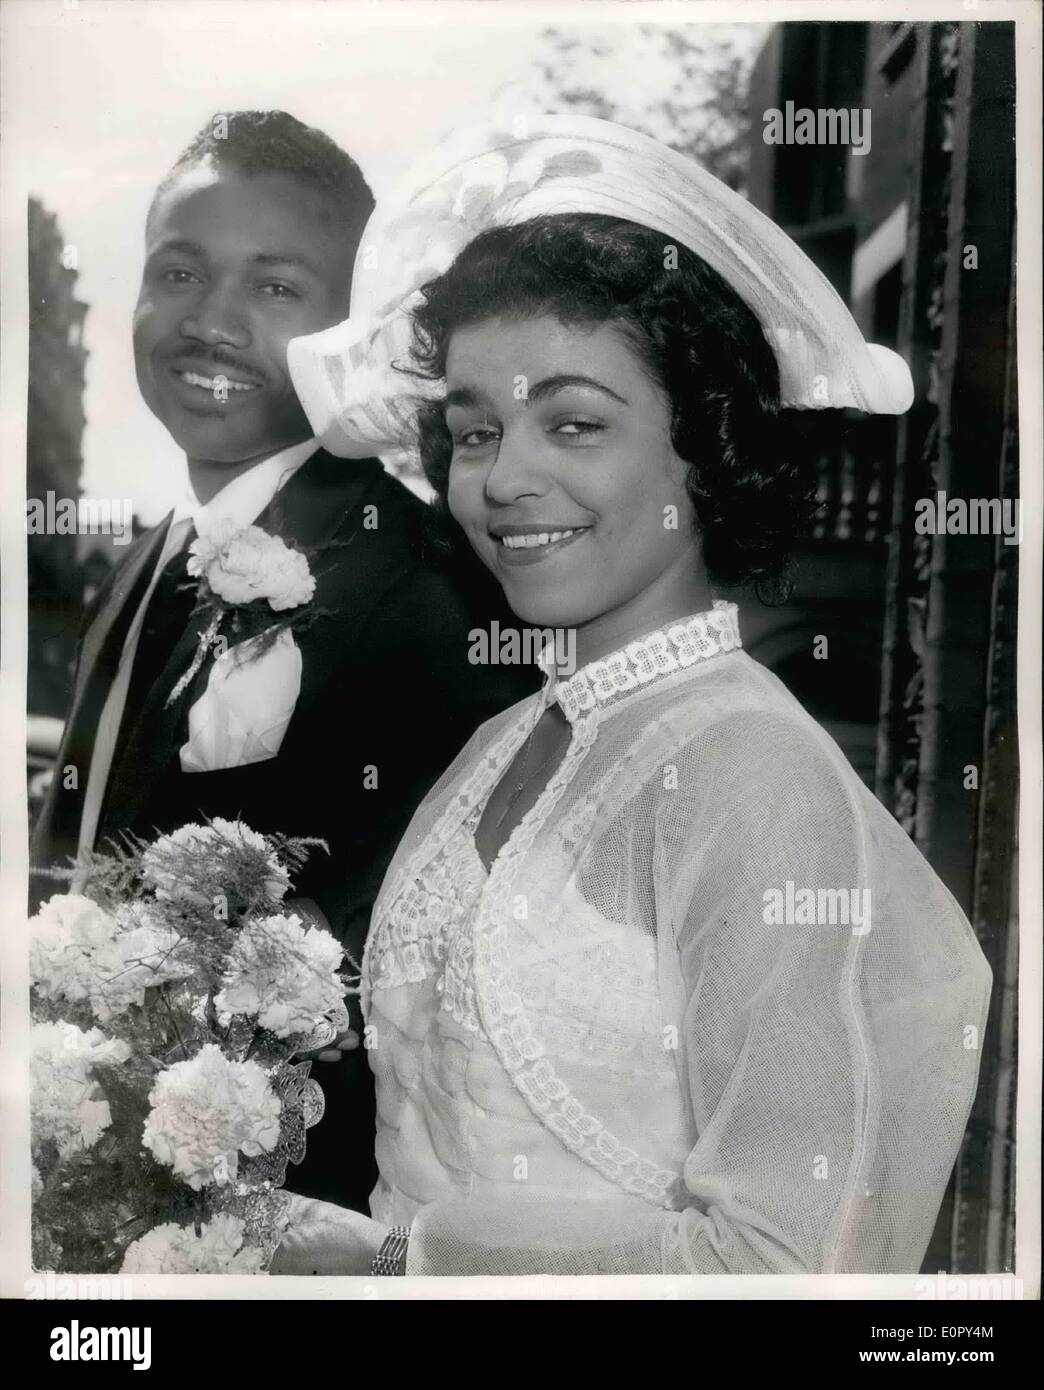 May 05, 1957 - Calypso singer weds U.S. Sergeant: Calypso singer, Mahala Davies, who sings in the B.B.C. program Calypso Calling, was married at Kensington Register Office today, to U.S. Army sergeant, Earl Wilkerson, of Jacksonville, Florida. Mahala, who comes from Tiger Bay, Cardiff, has a Welsch mother and Jamaican father, She leaves for Helsinki tomorrow for a three months singing tour. Photo shows the bride and groom after the ceremony. Stock Photo